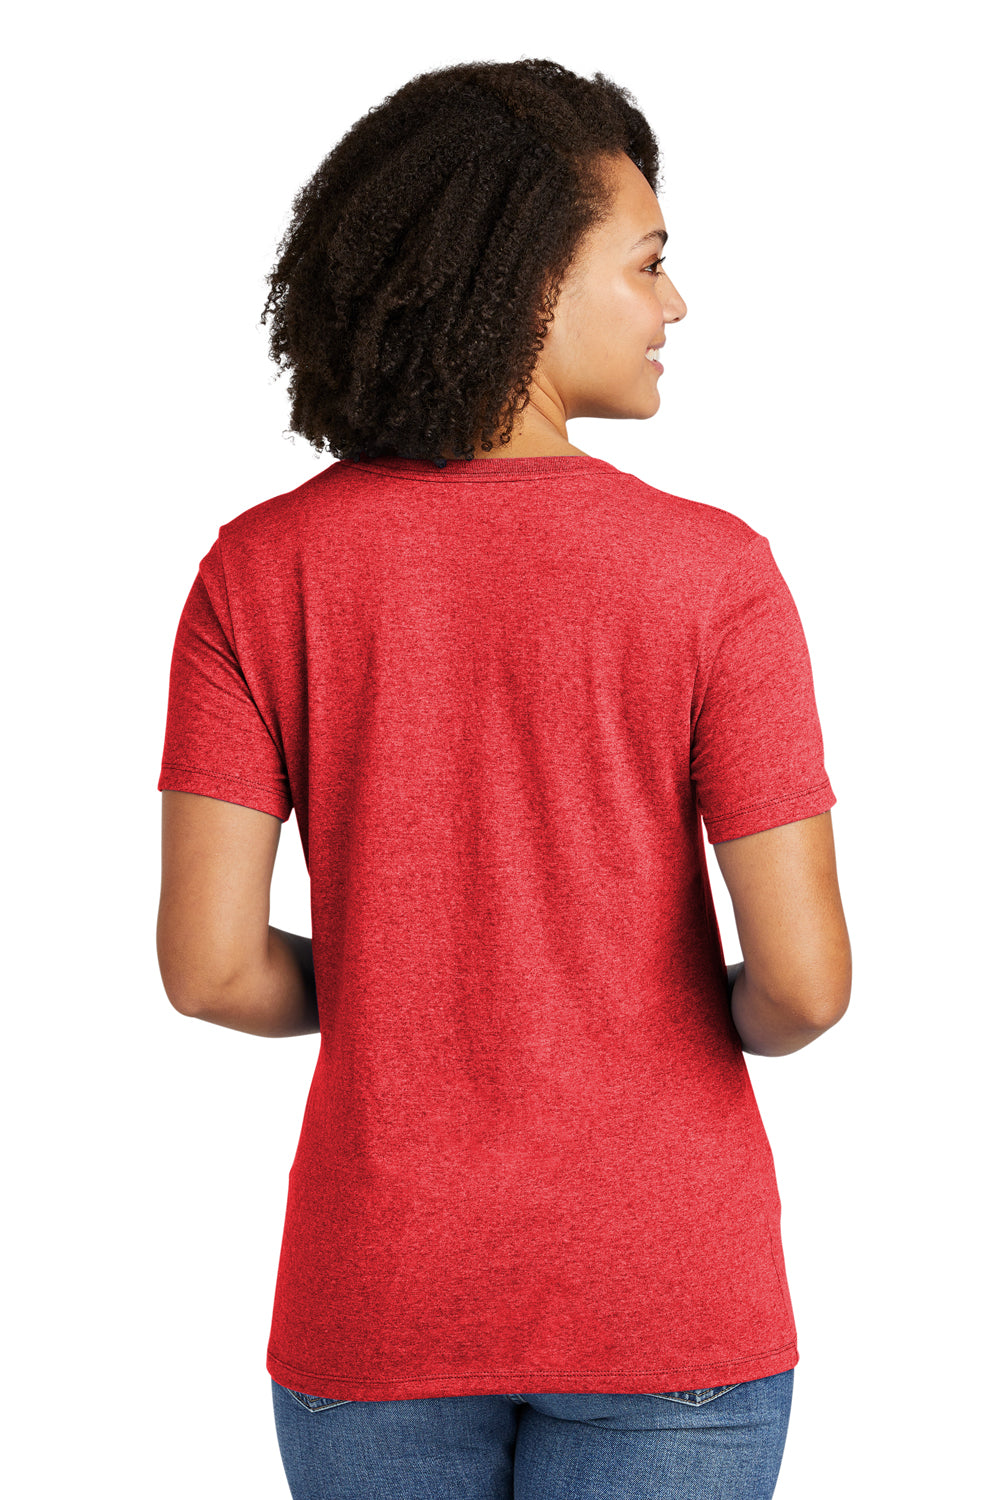 Allmade AL2303 Womens Recycled Short Sleeve V-Neck T-Shirt Heather Red Model Back